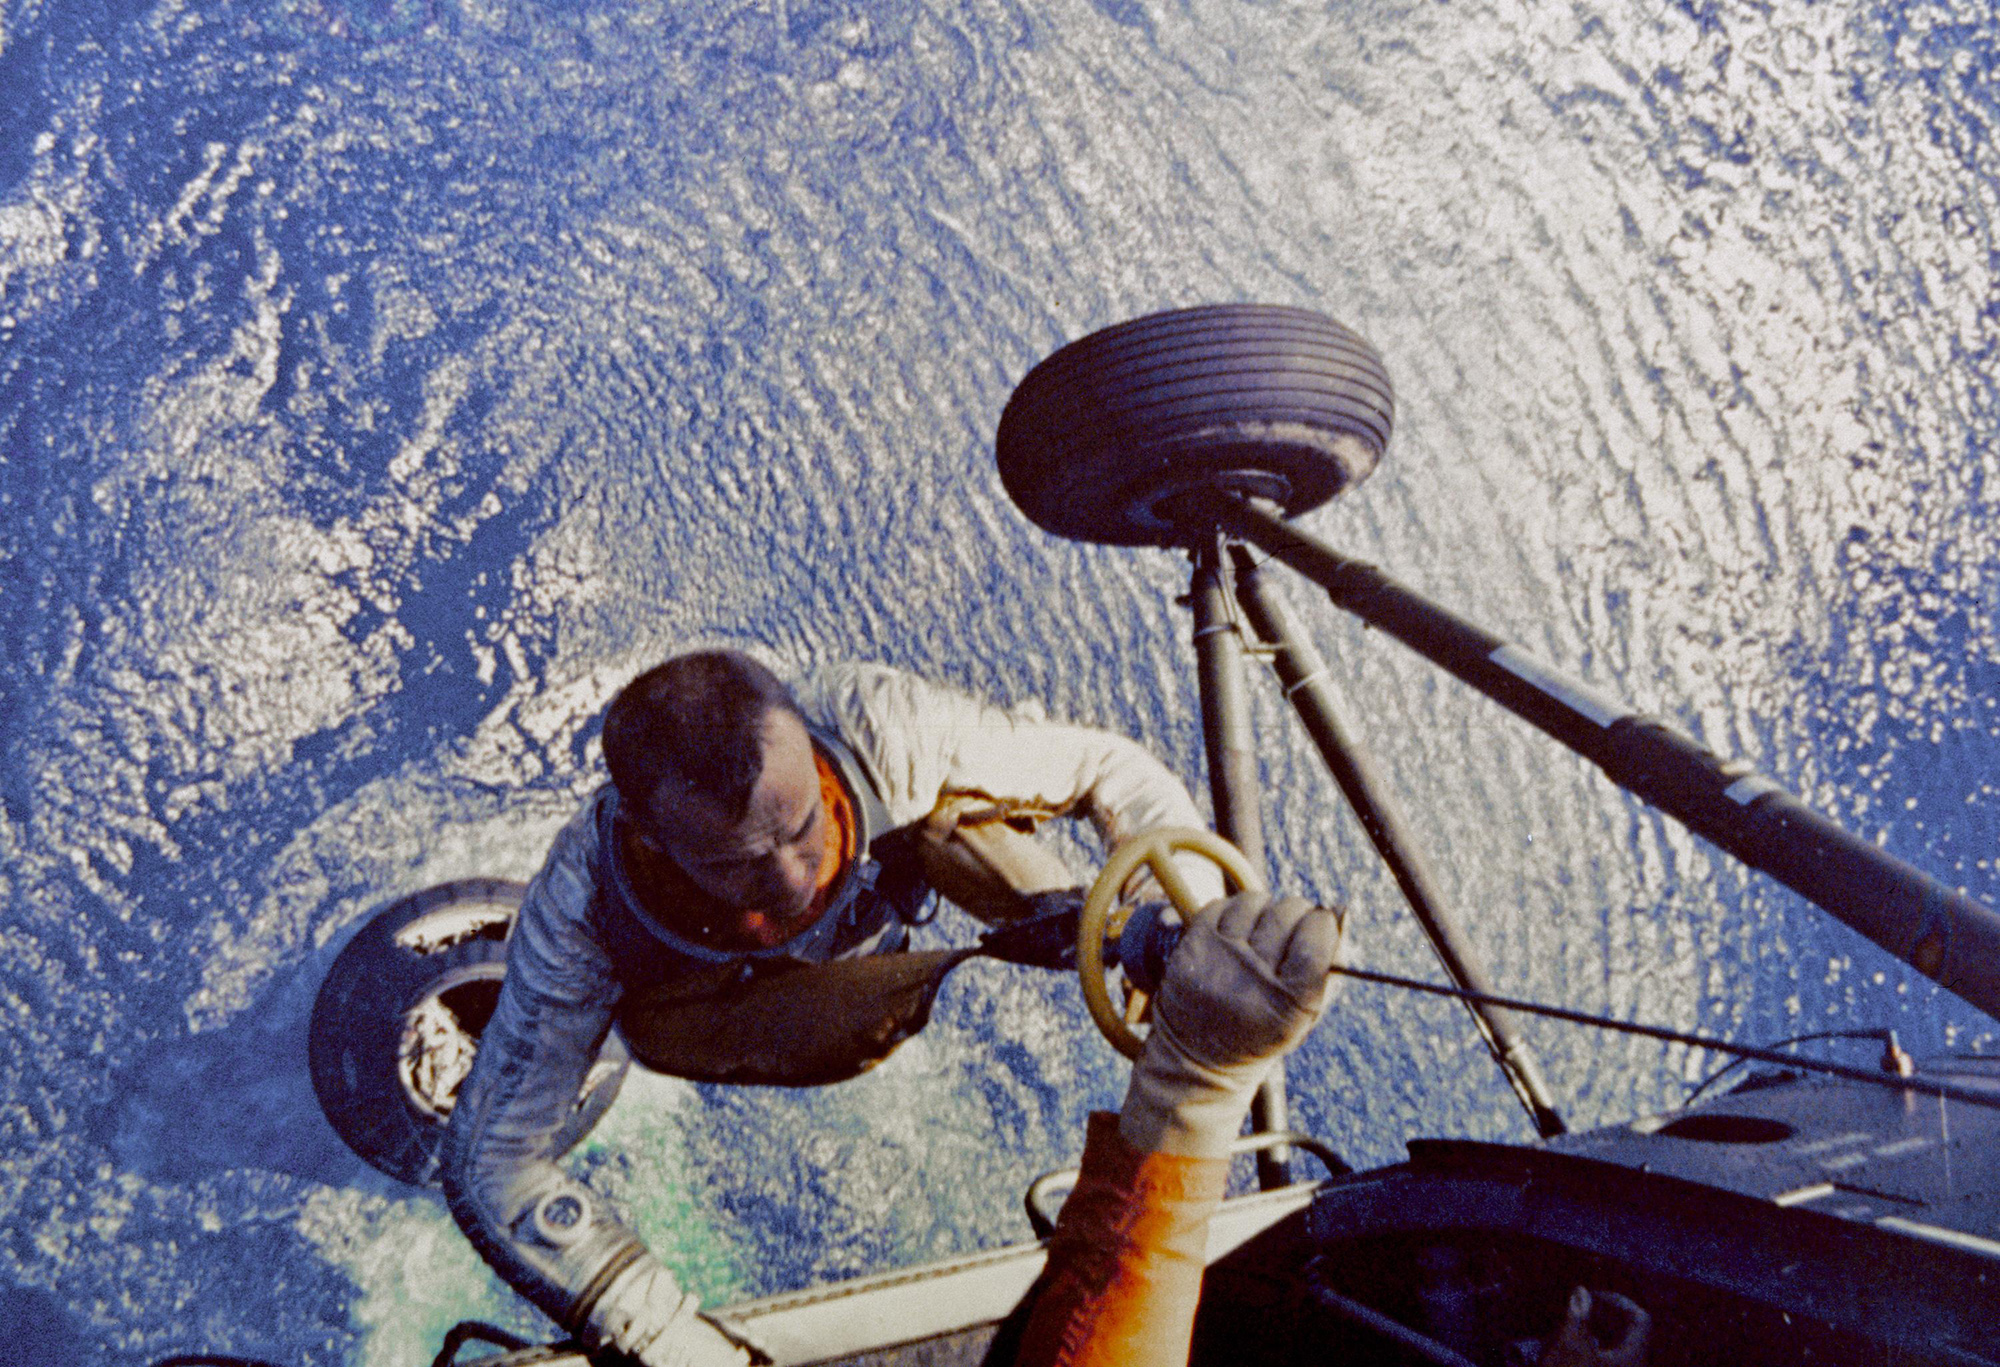 alan-shepard-completes-his-mission.jpg